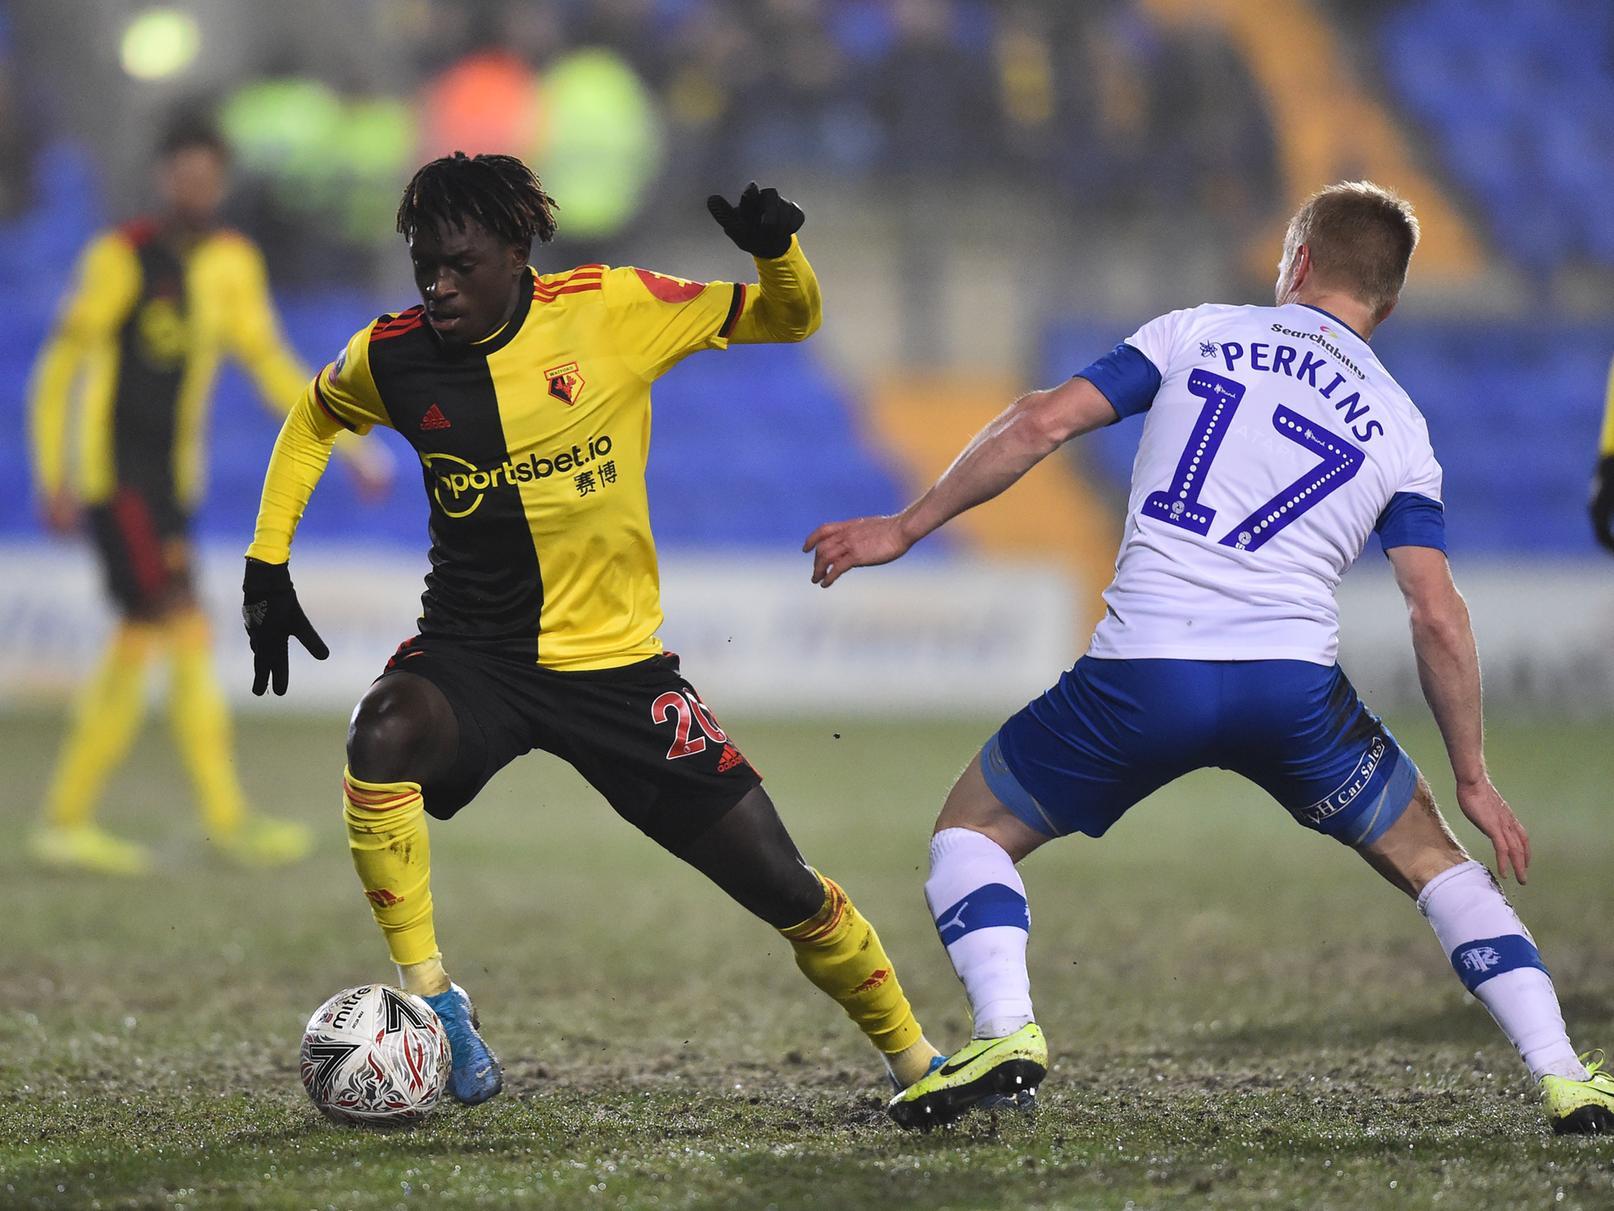 West Bromwich Albion boss Slaven Bilic has revealed that his club came close to signing Watford's Domingos Quina last month, but couldn't make the deal happen without another Baggies player leaving. (Express & Star)